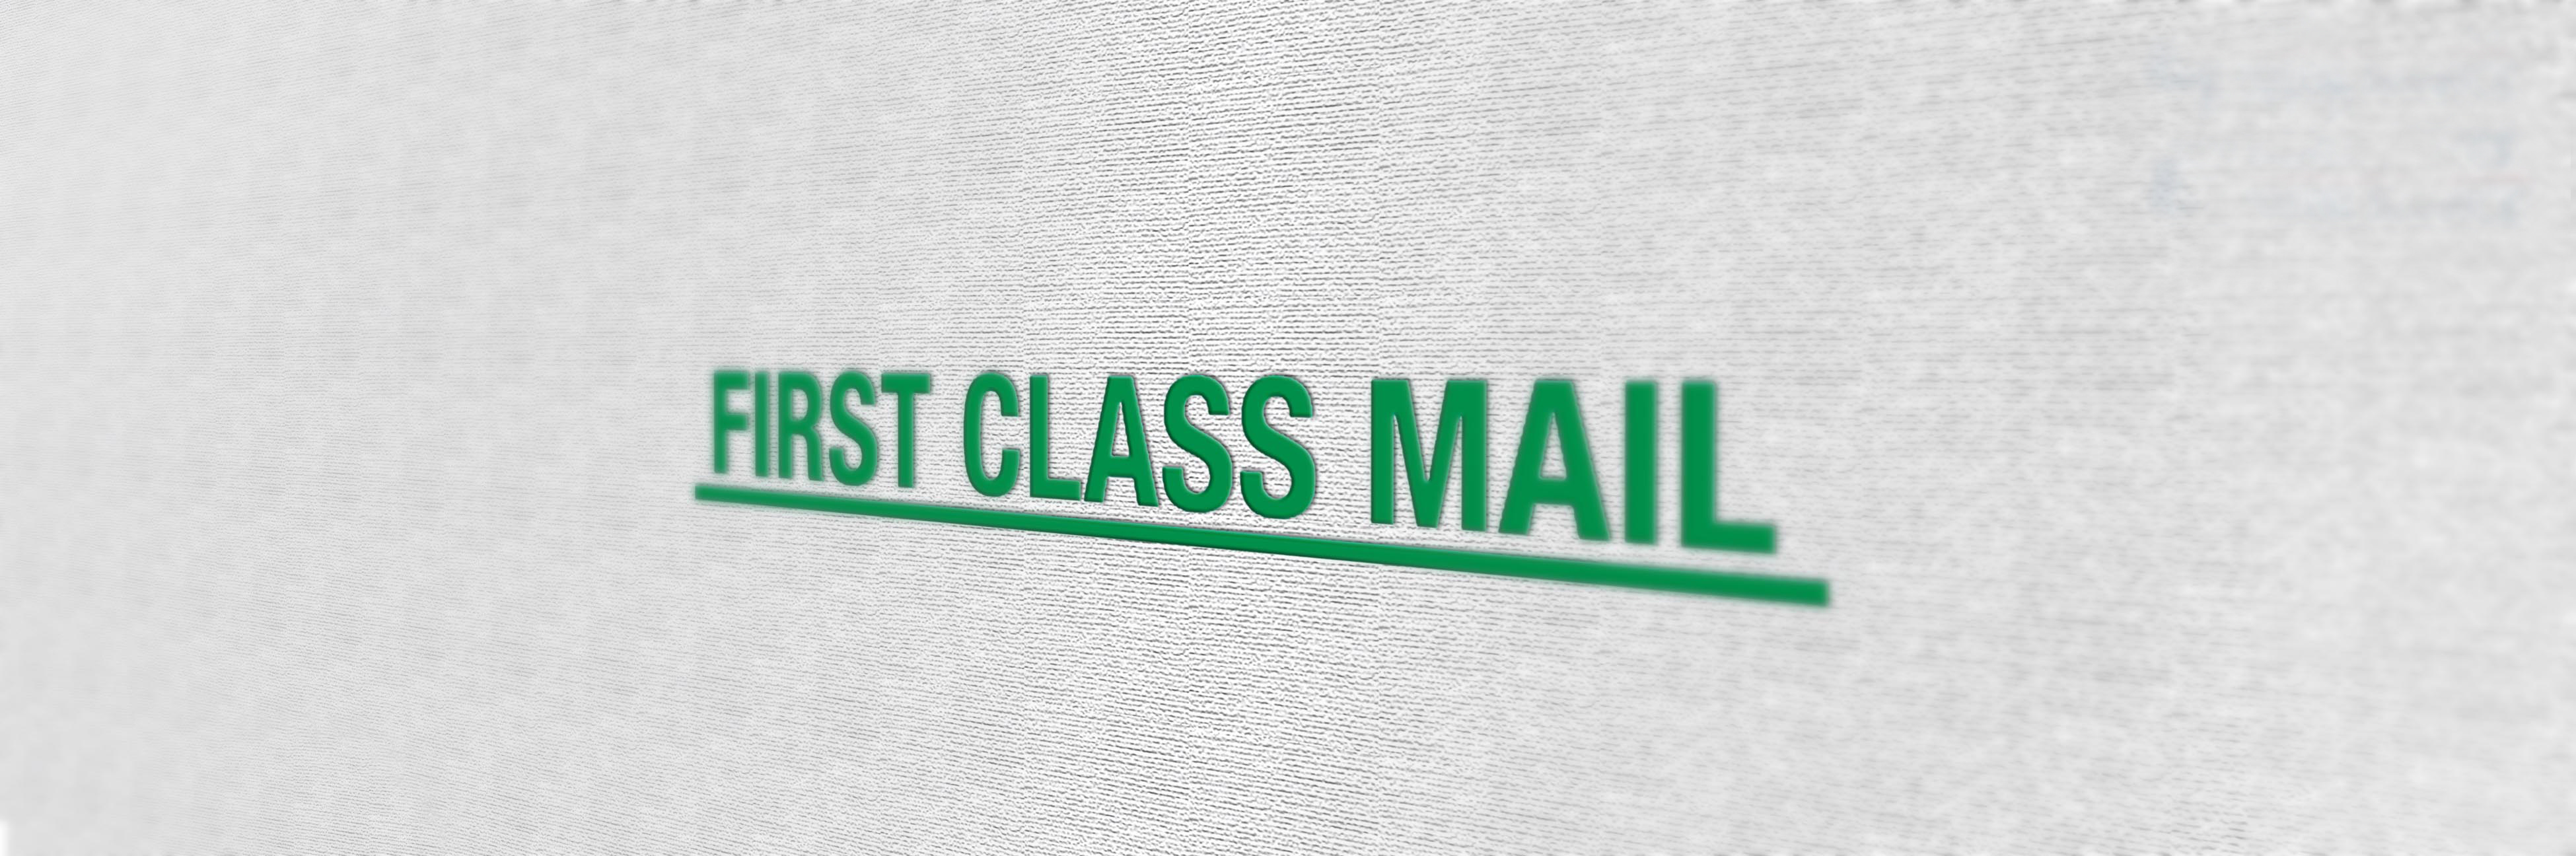 1st Class Mailing Generic Envelope Picture